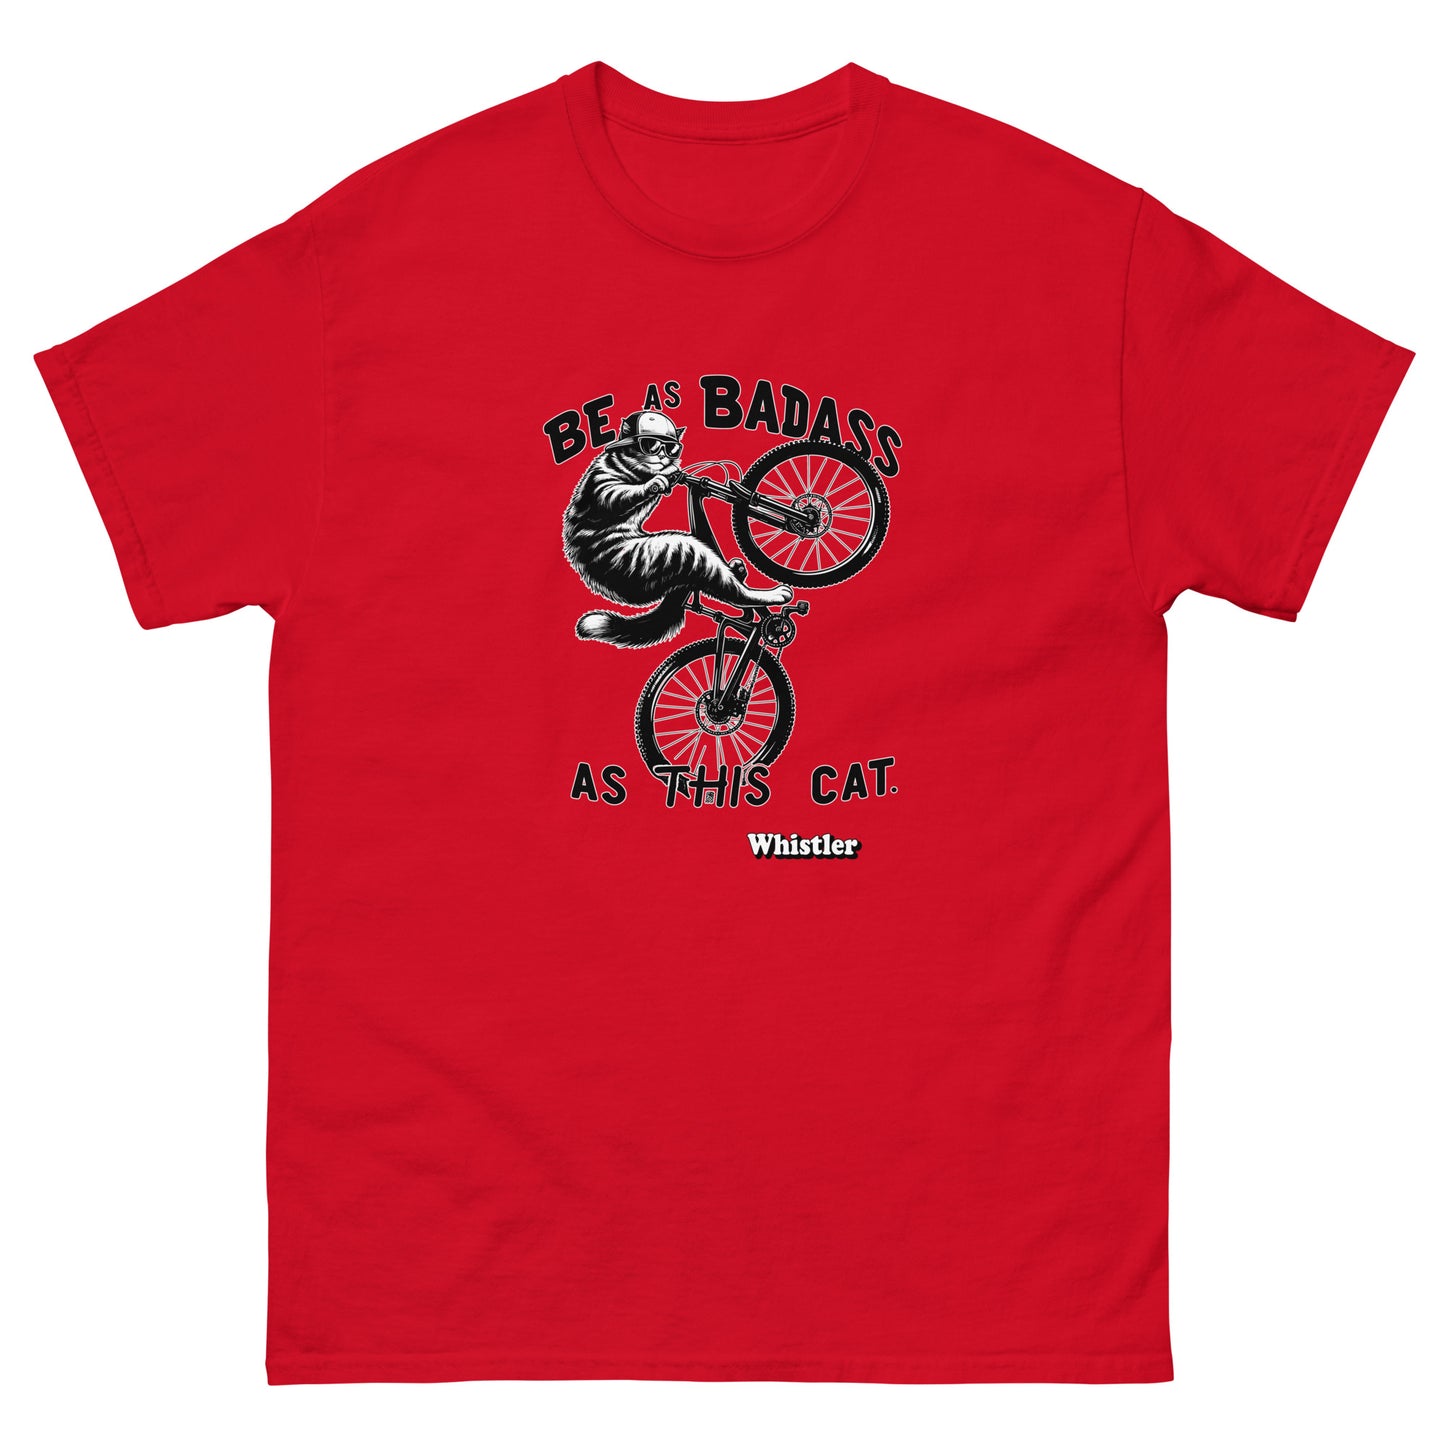 Be as badass as this cat whistler cat riding a bike design printed on a t-shirt by Whistler Shirts